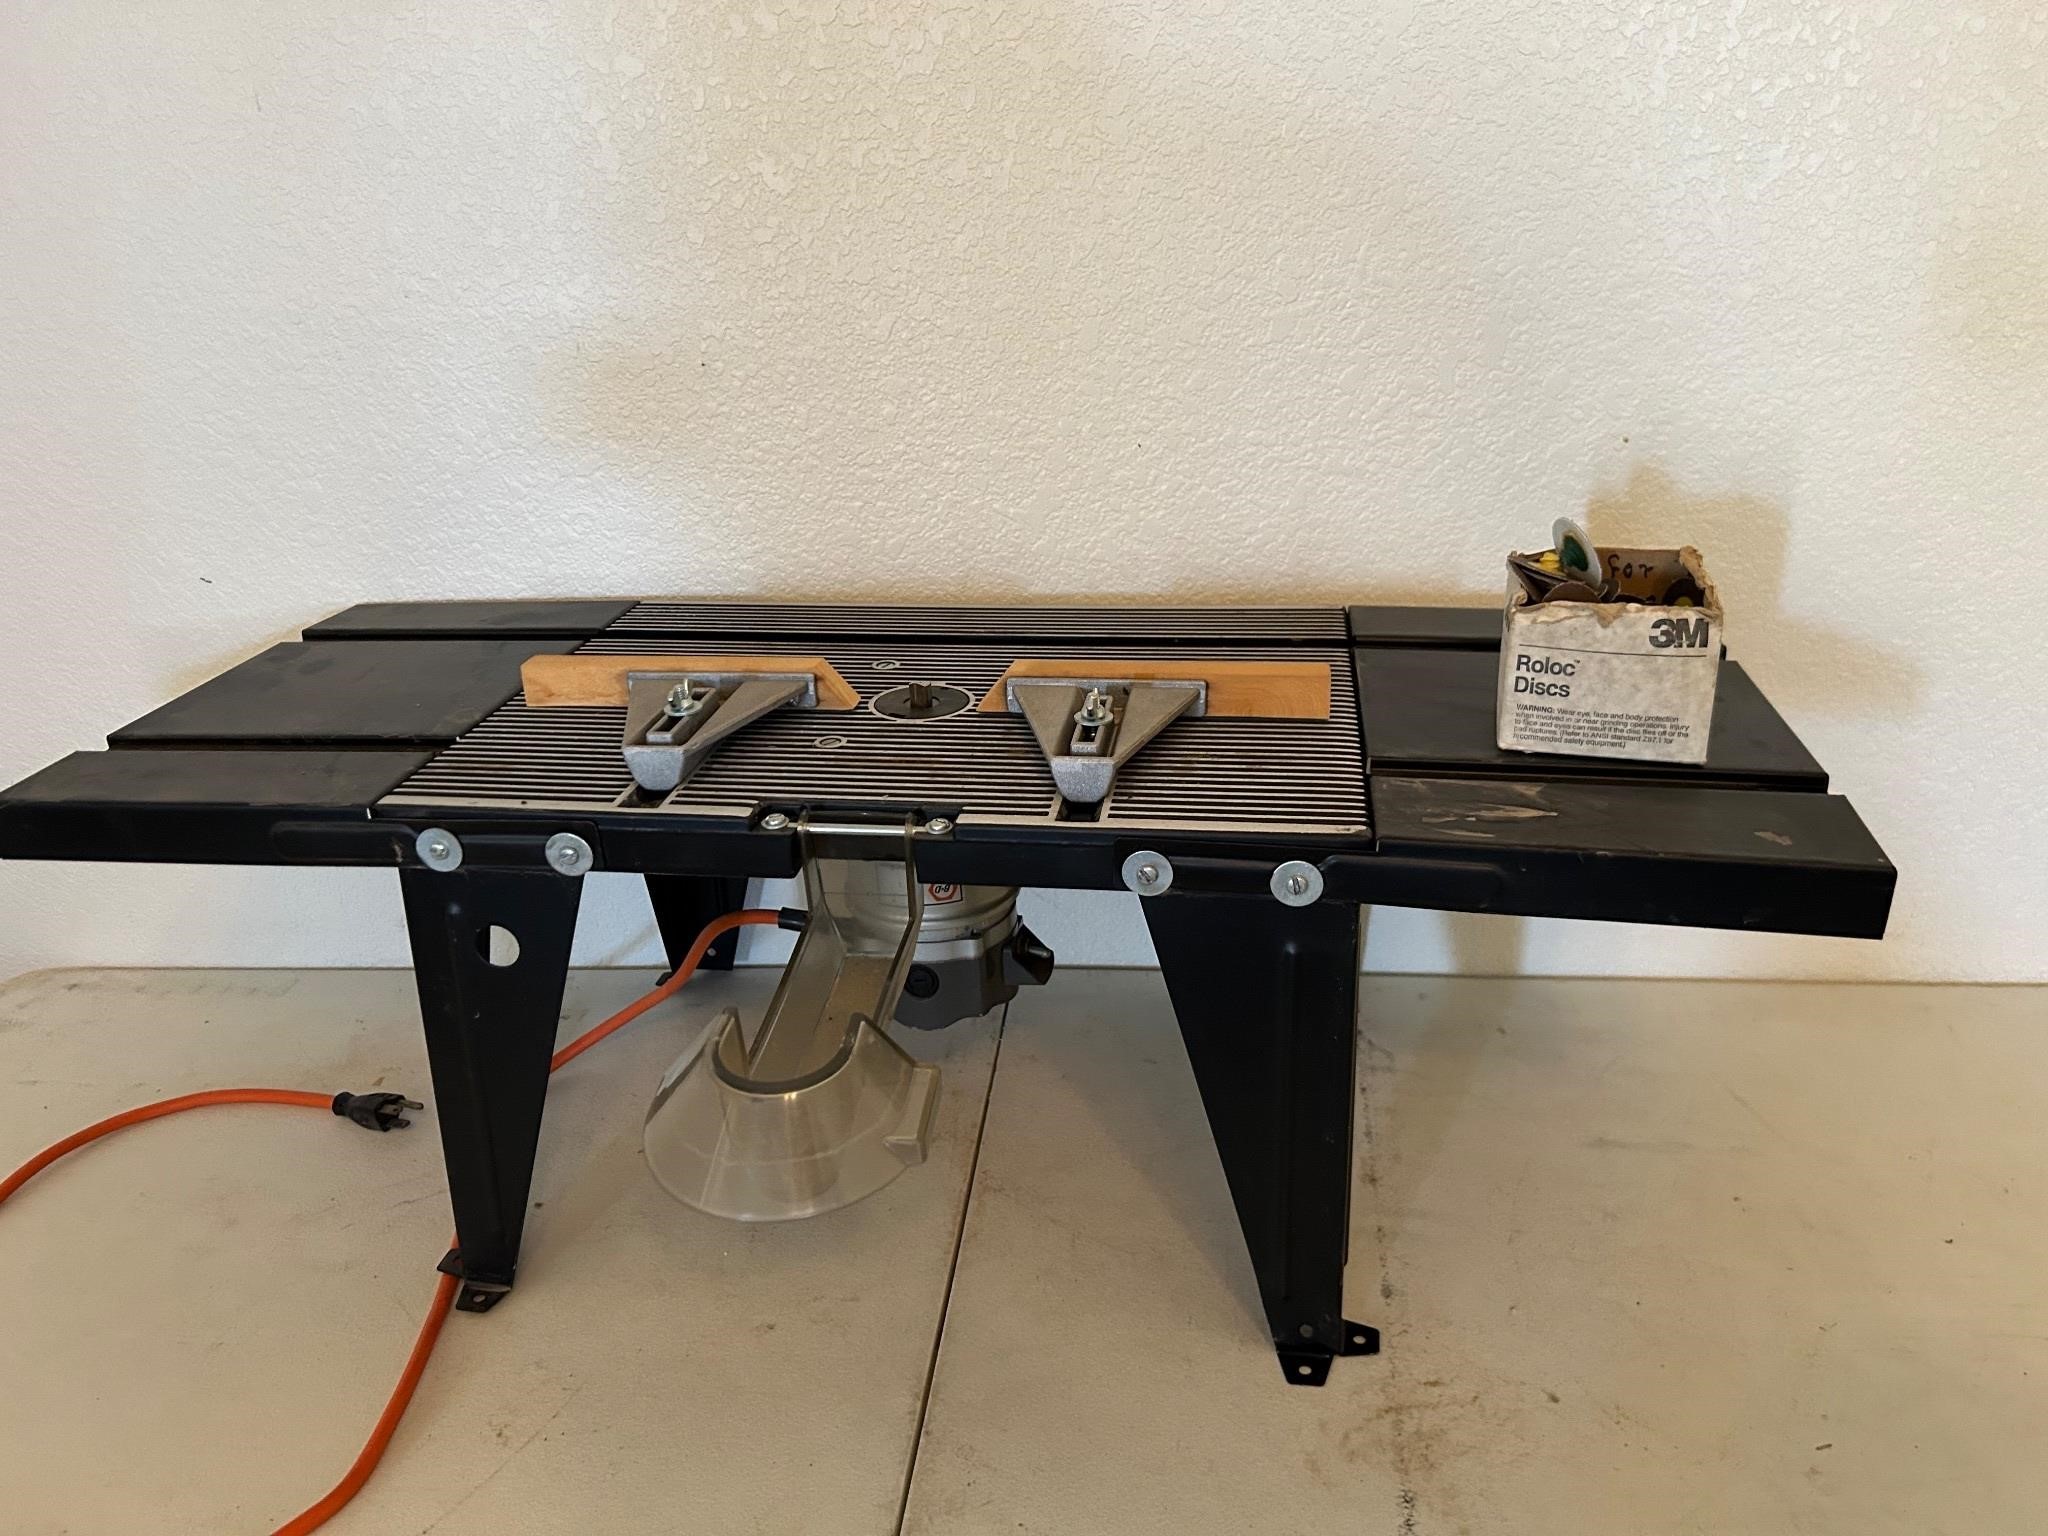 Black & Decker Router Mounted on Portable Table